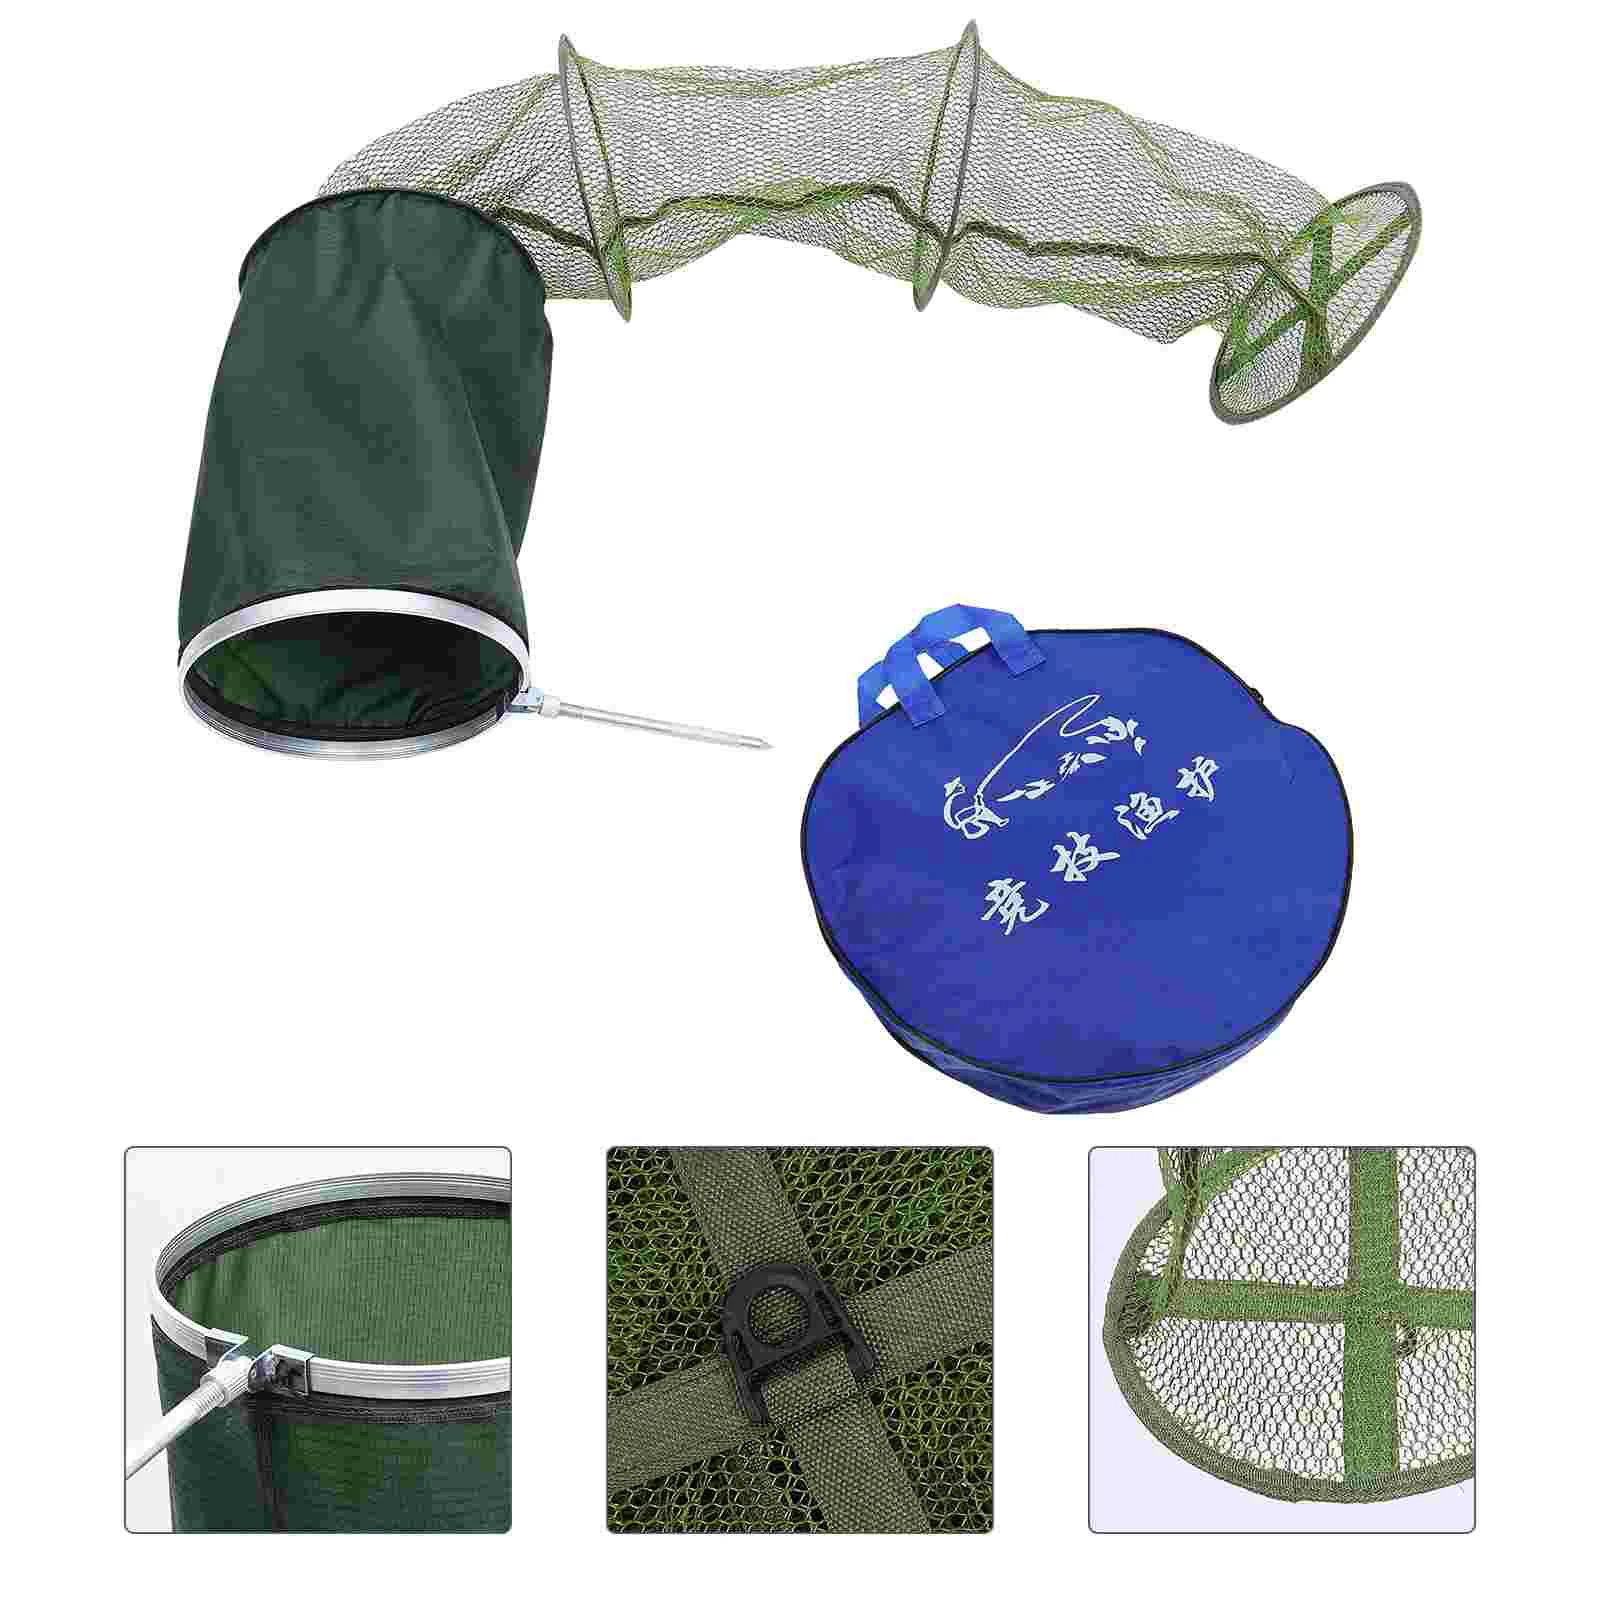 

Fish Protection Fishing Bag Tuck Net Bass Baits Landing Mesh Basket Catch Collapsible Catching Supply Crayfish Container